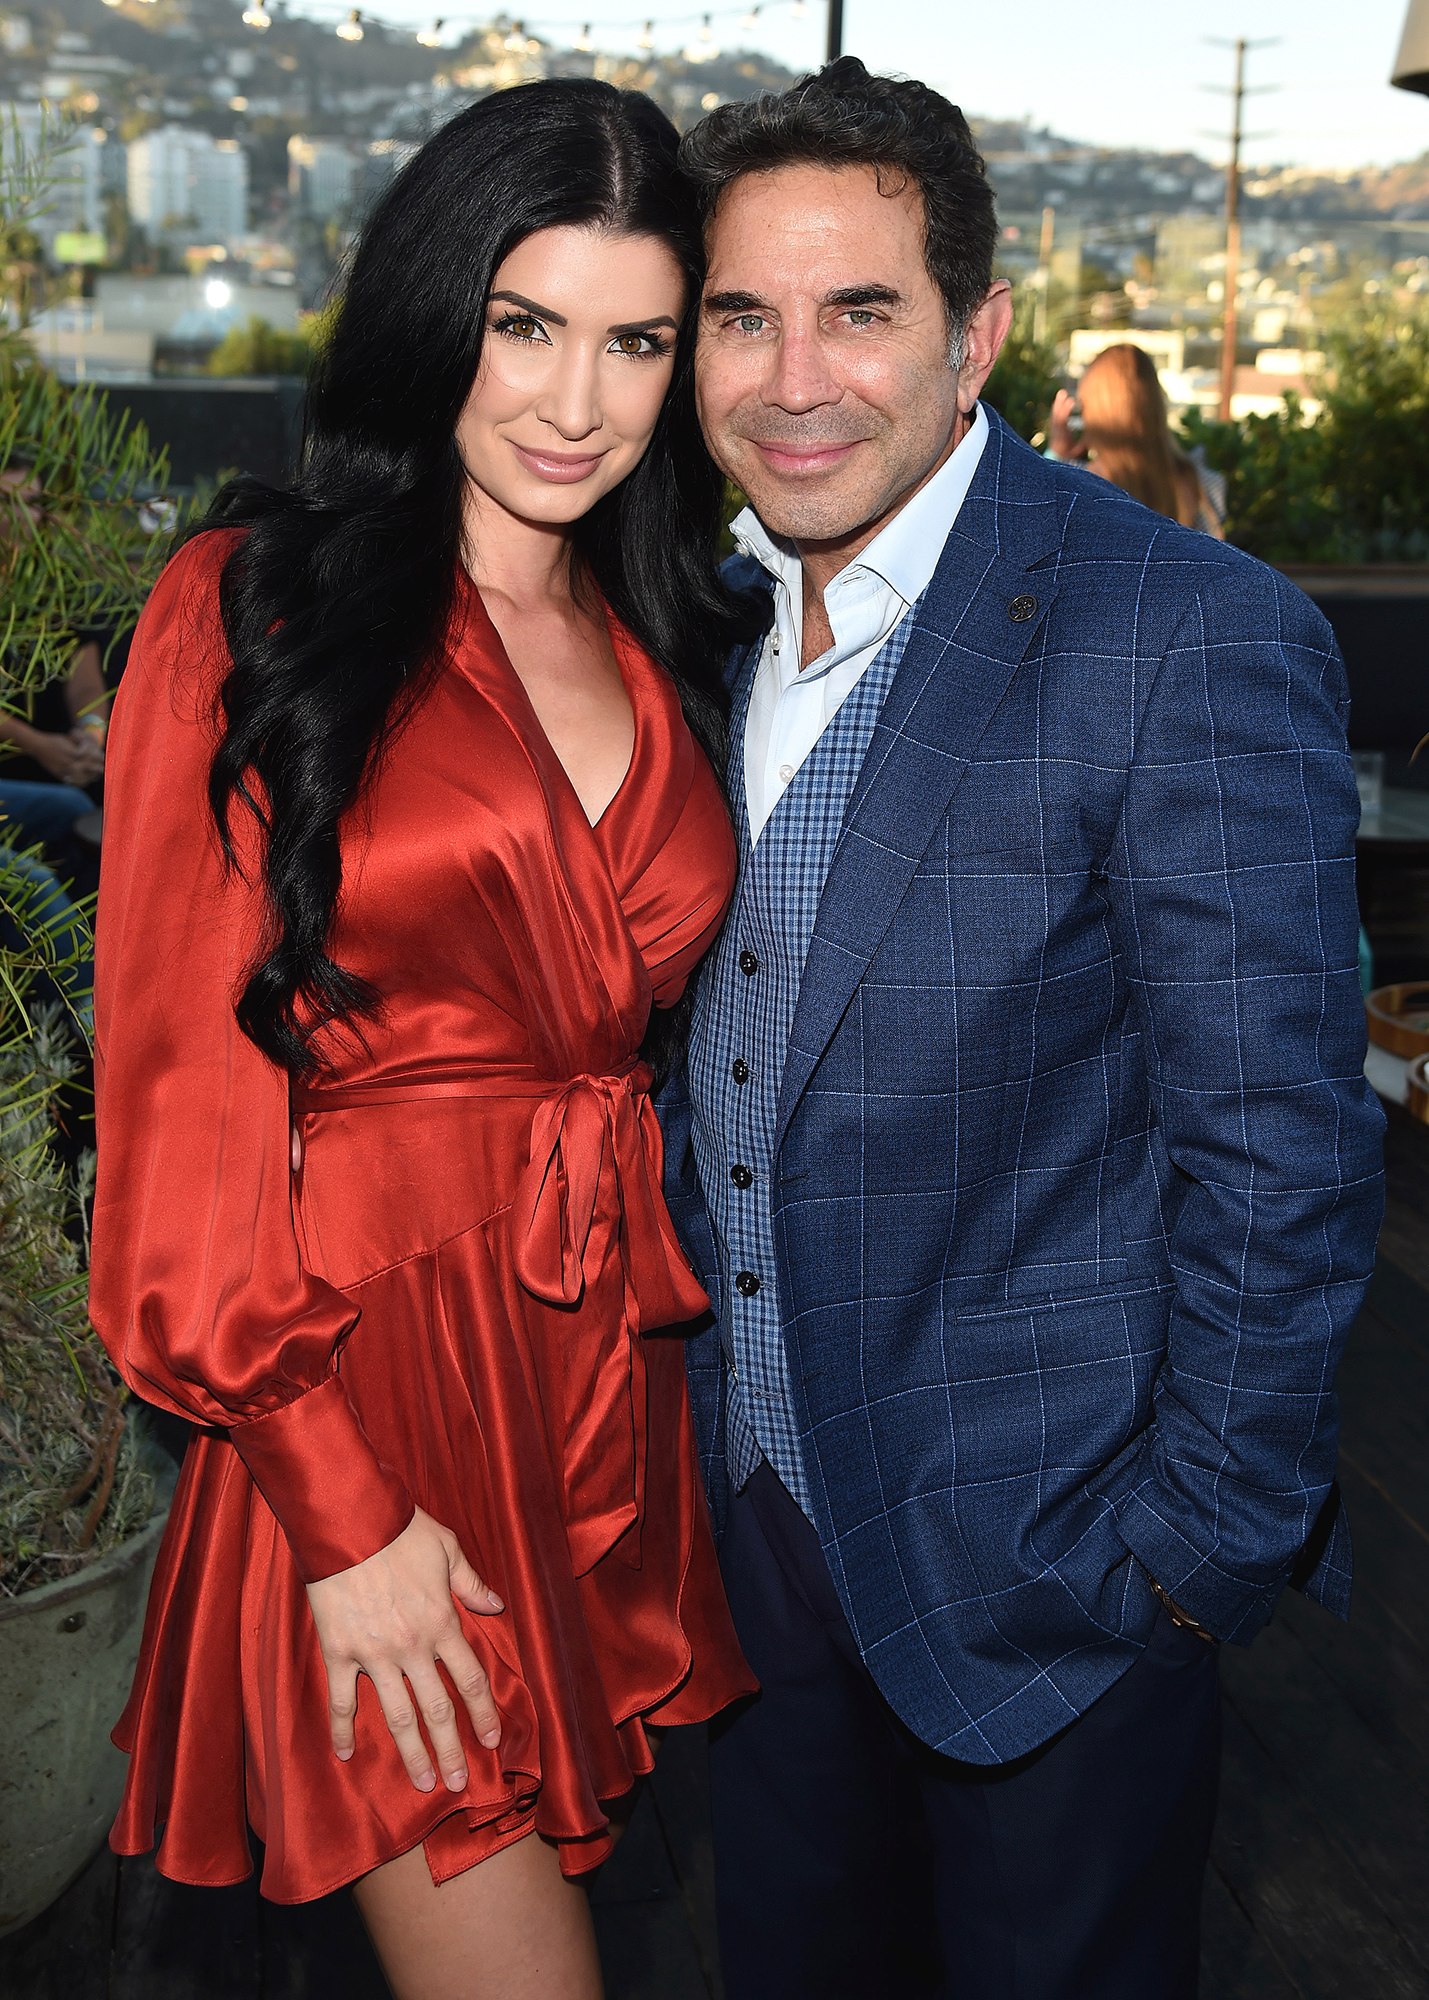 Botcheds Paul Nassif, Wife Brittany Welcome 1st Child Together pic